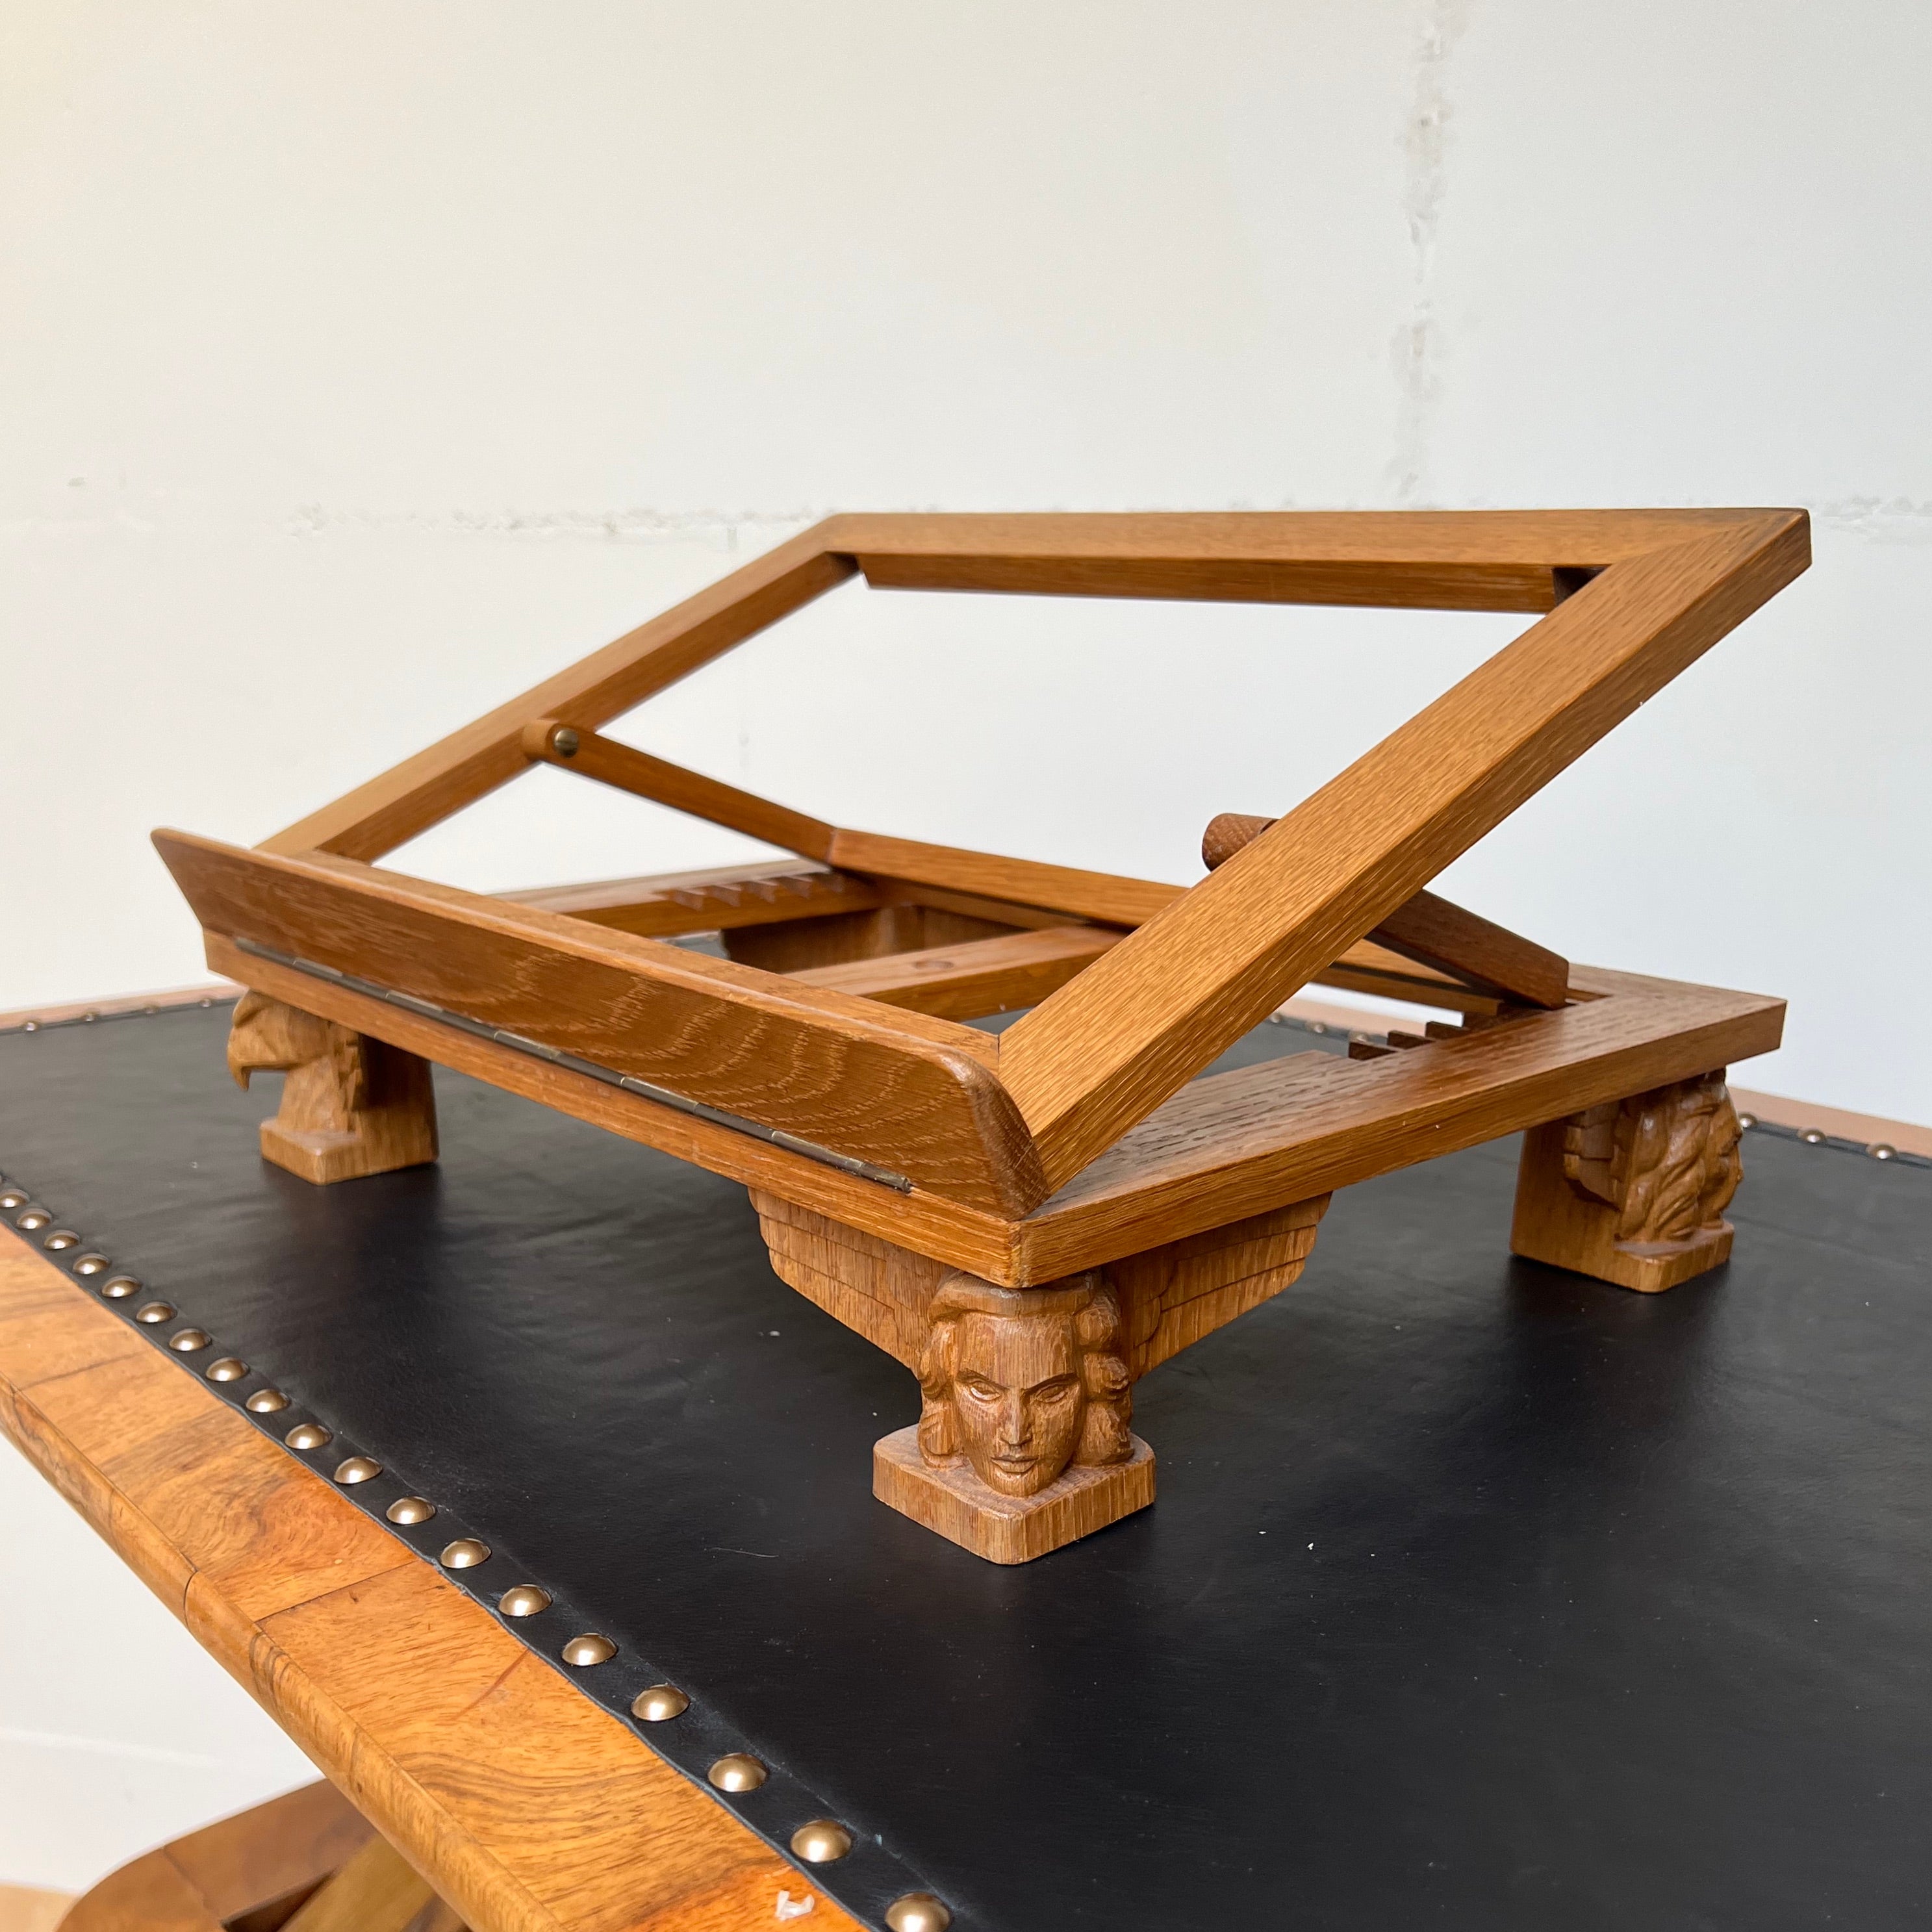 One of a kind and fully adjustable, church book stand.

This unique and hand carved antique Gothic Revival bible stand is of museum quality and condition. All handcrafted out of solid tiger oak only, this stand dates back to the early years of the